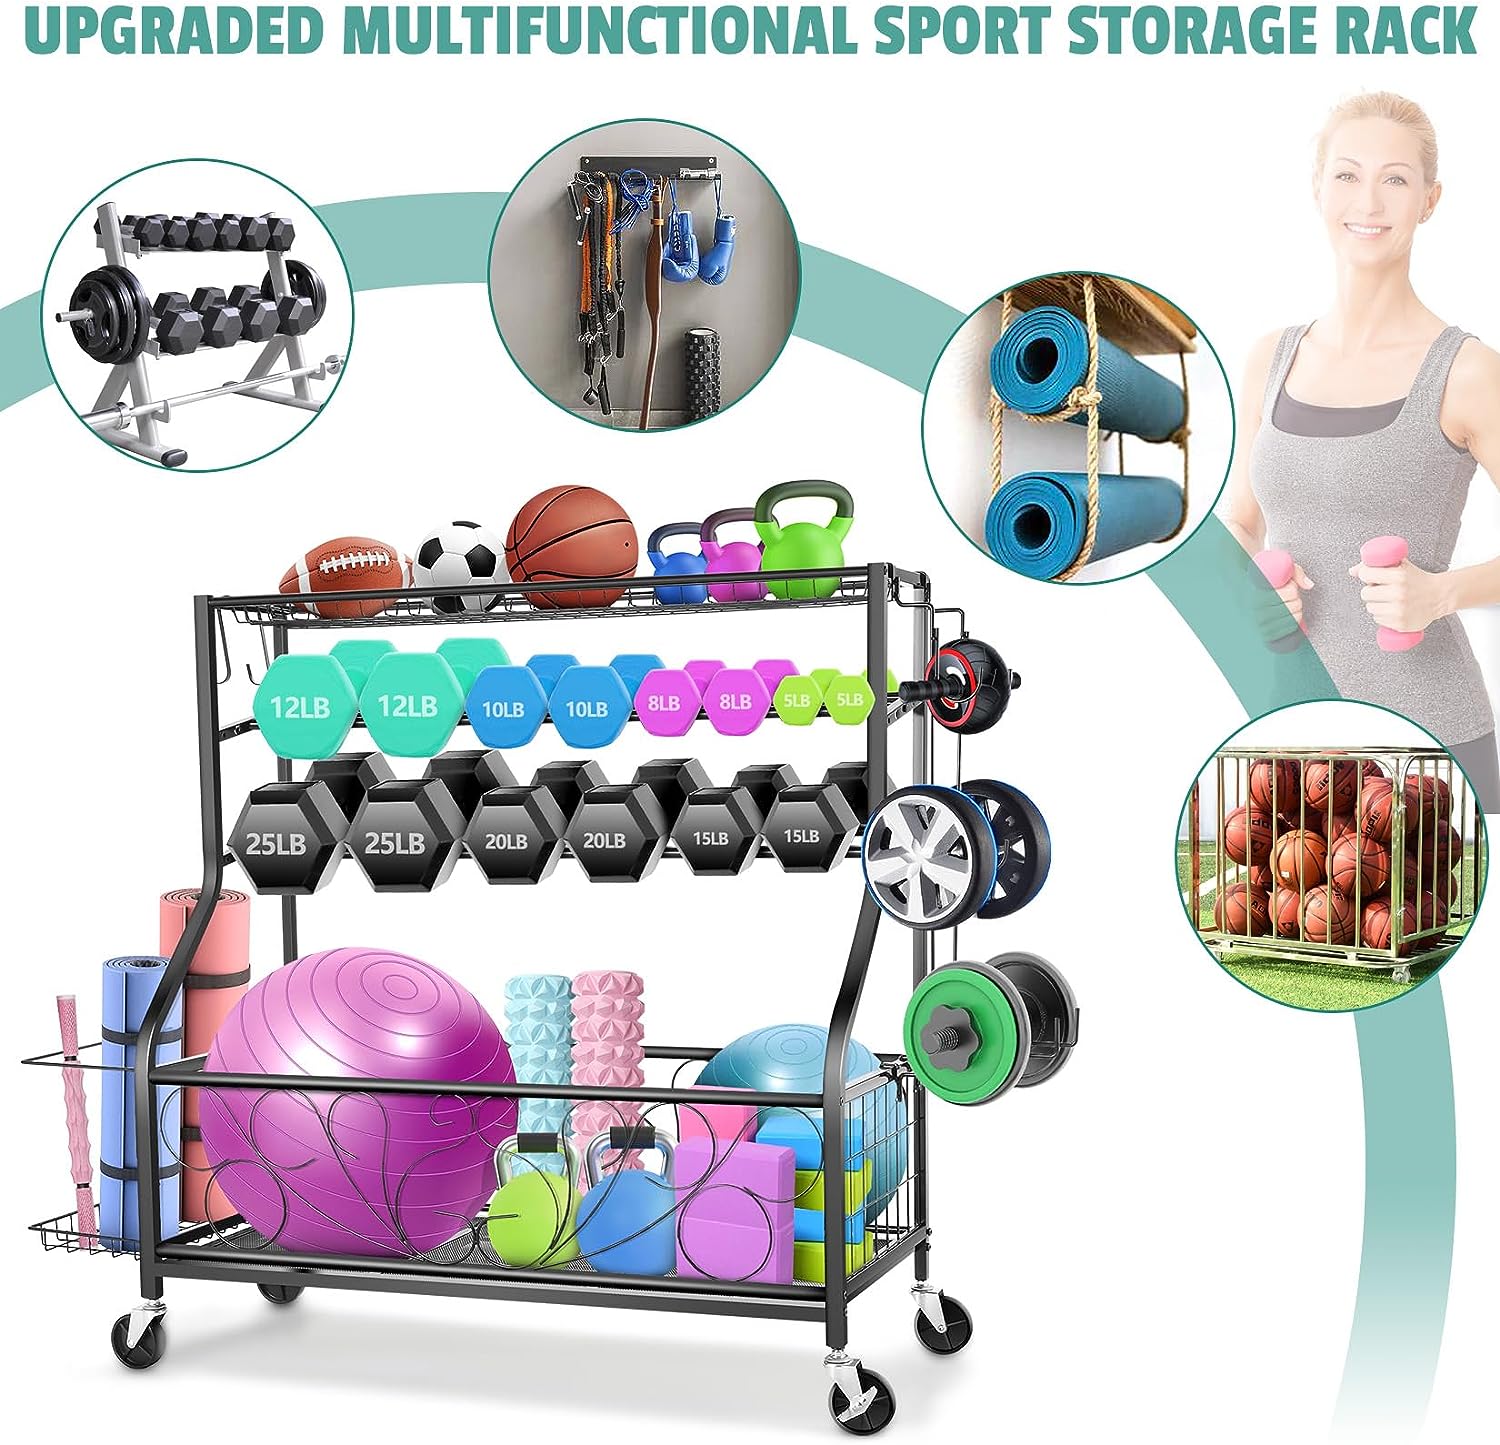 Upgrade Dumbbell Rack, Home Gym Storage Rack for Dumbbells Kettlebells Foam Roller Yoga Mat and Balls, Weight Rack All in One Workout Equipment Storage Organizer With Hooks and Wheels - Easy to Assemble